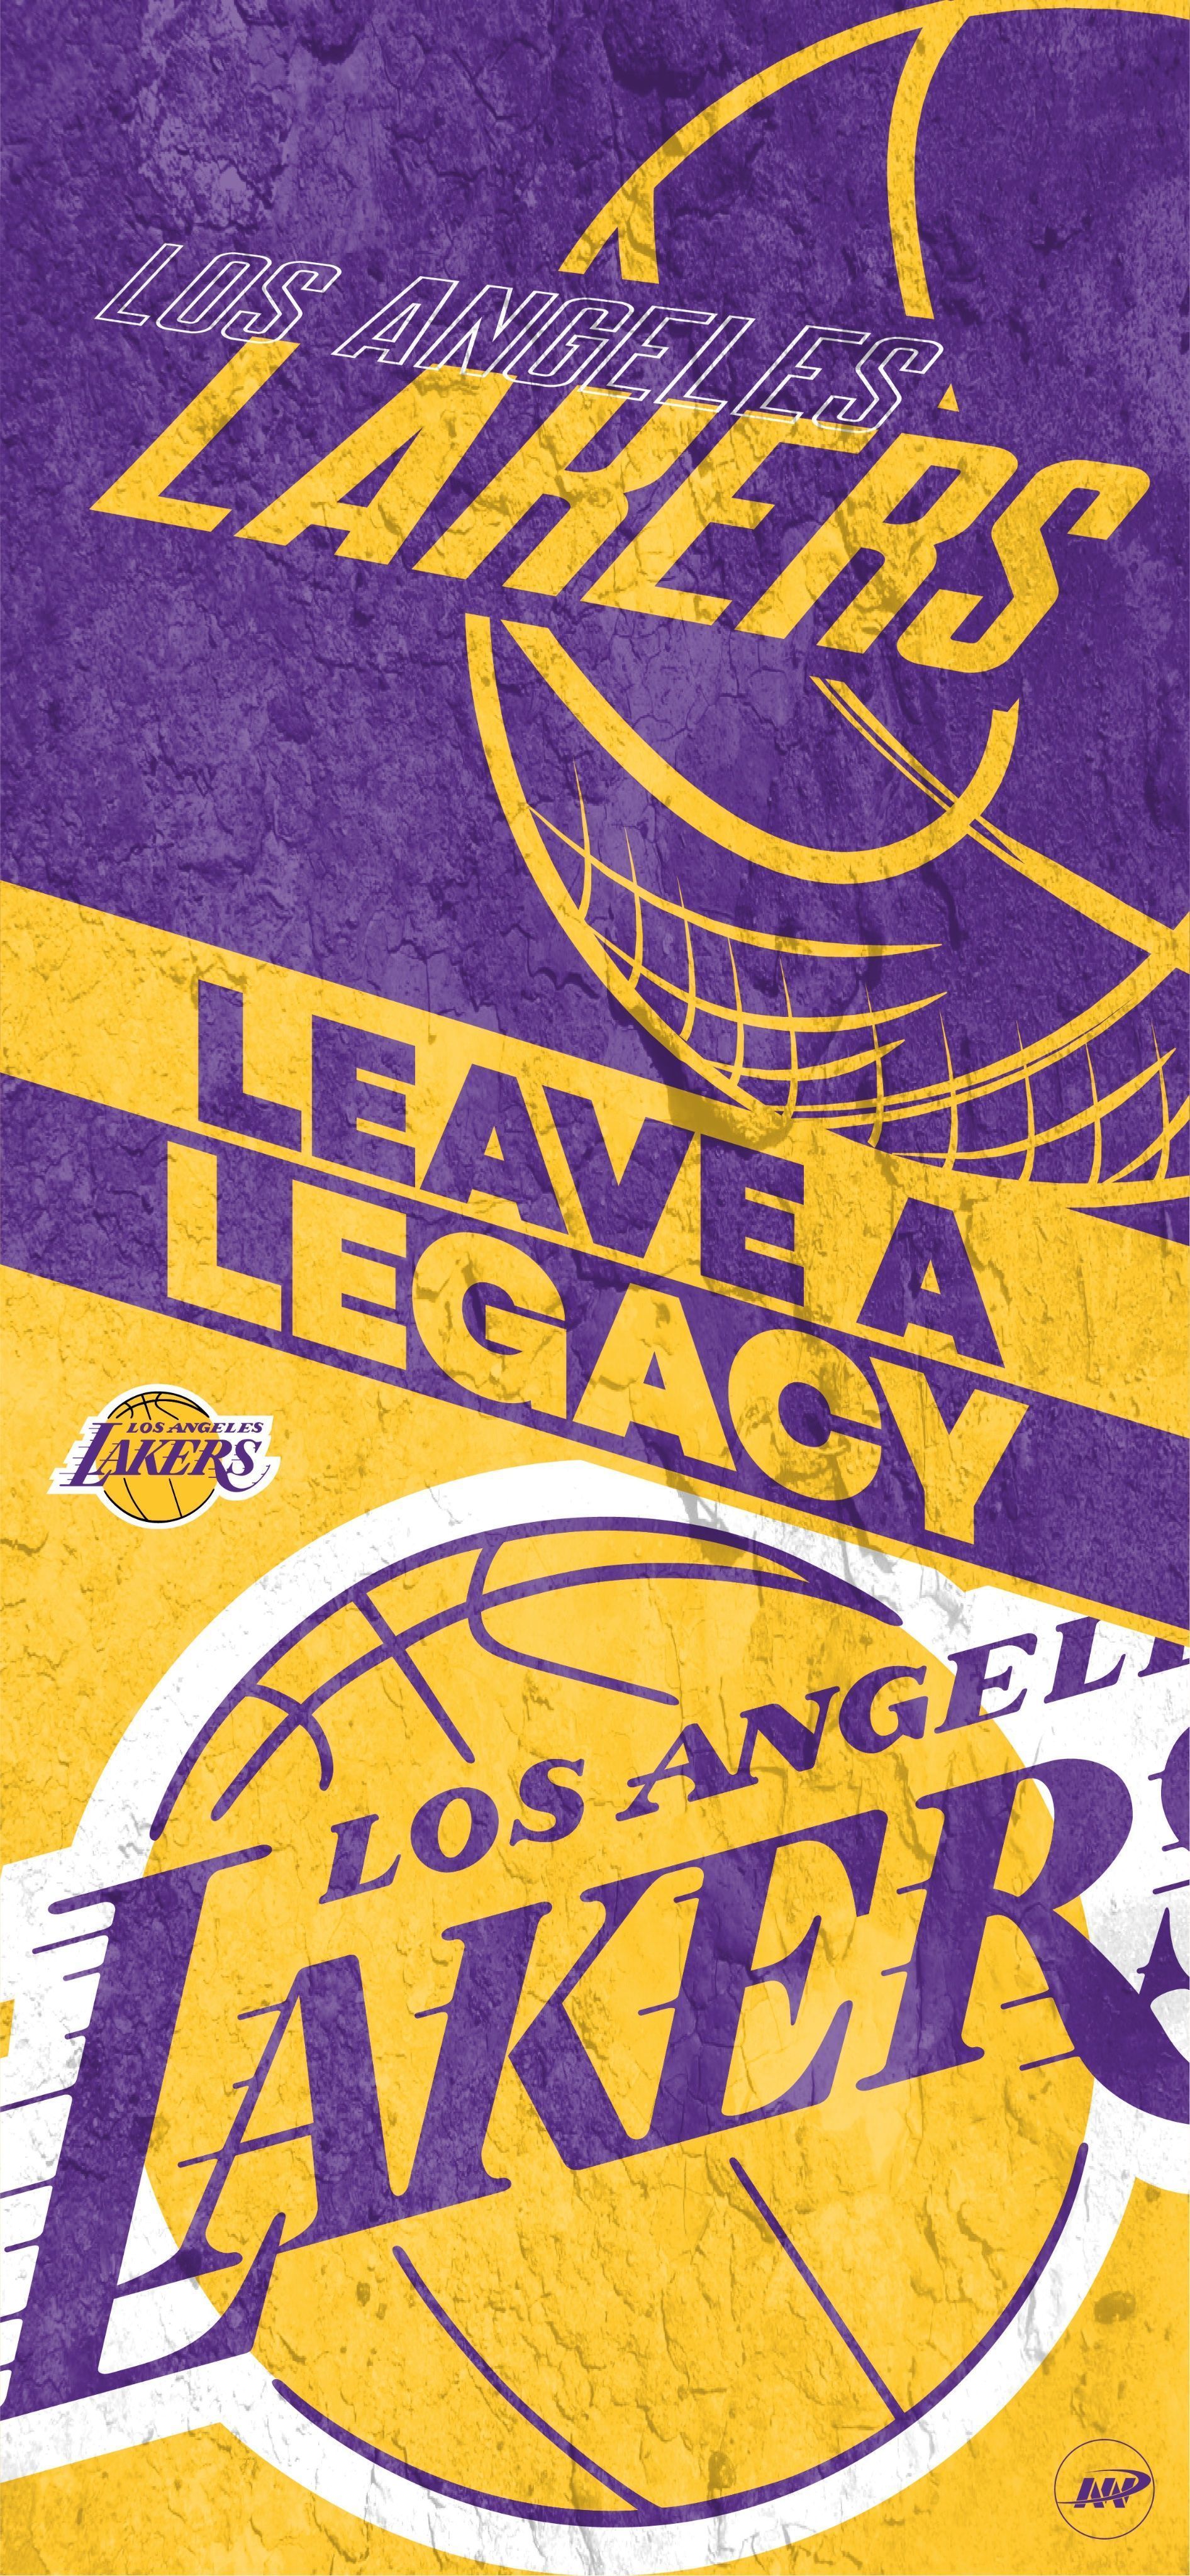 Los Angeles Lakers wallpaper for iPhone and Android. - Los Angeles Lakers